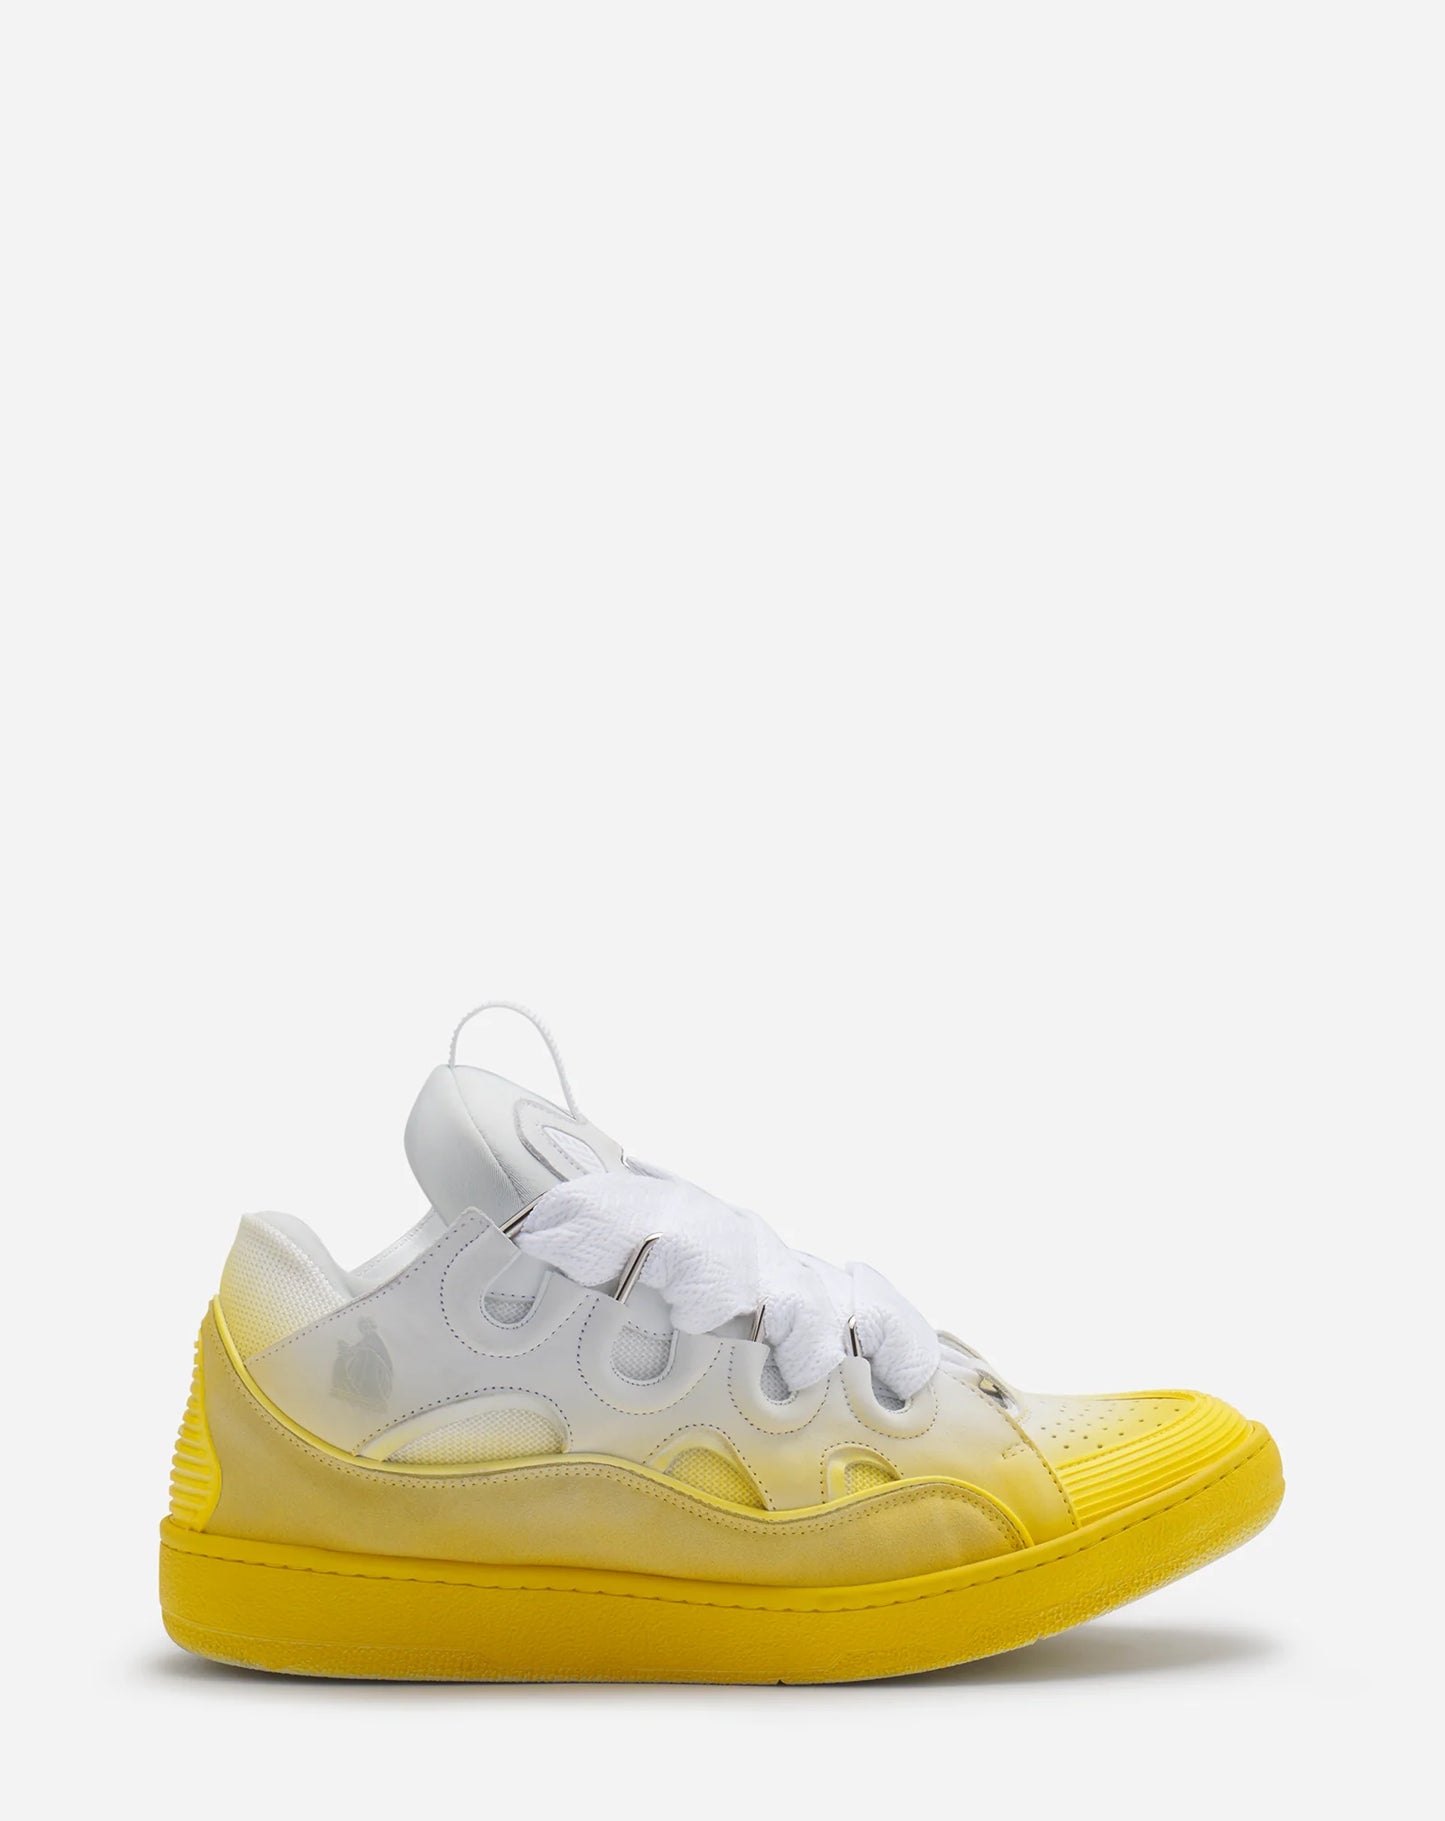 LANVIN YELLOW CURB OMBRE SNEAKERS